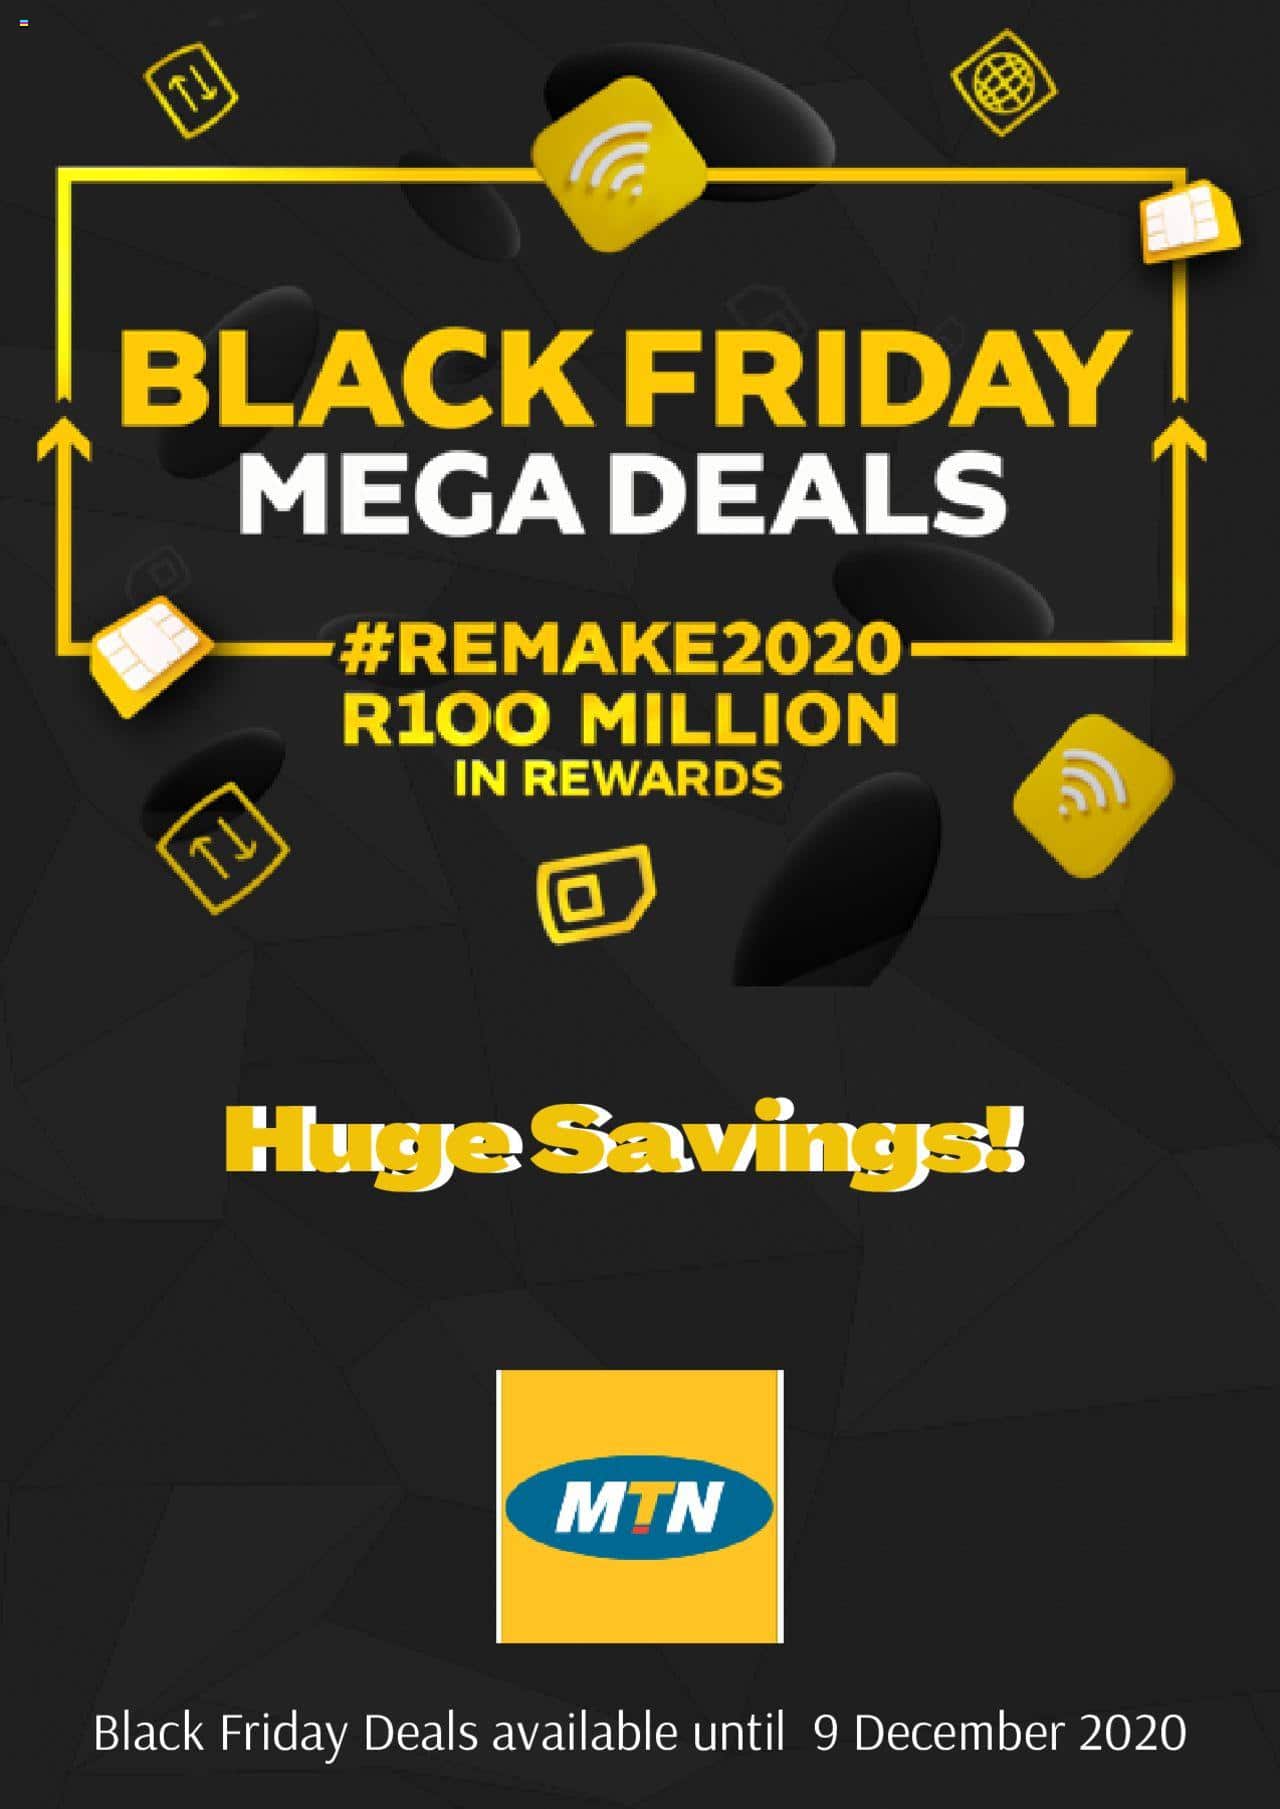 MTN Black Friday Deals & Specials 2021 - Is The Black Friday Deal Real